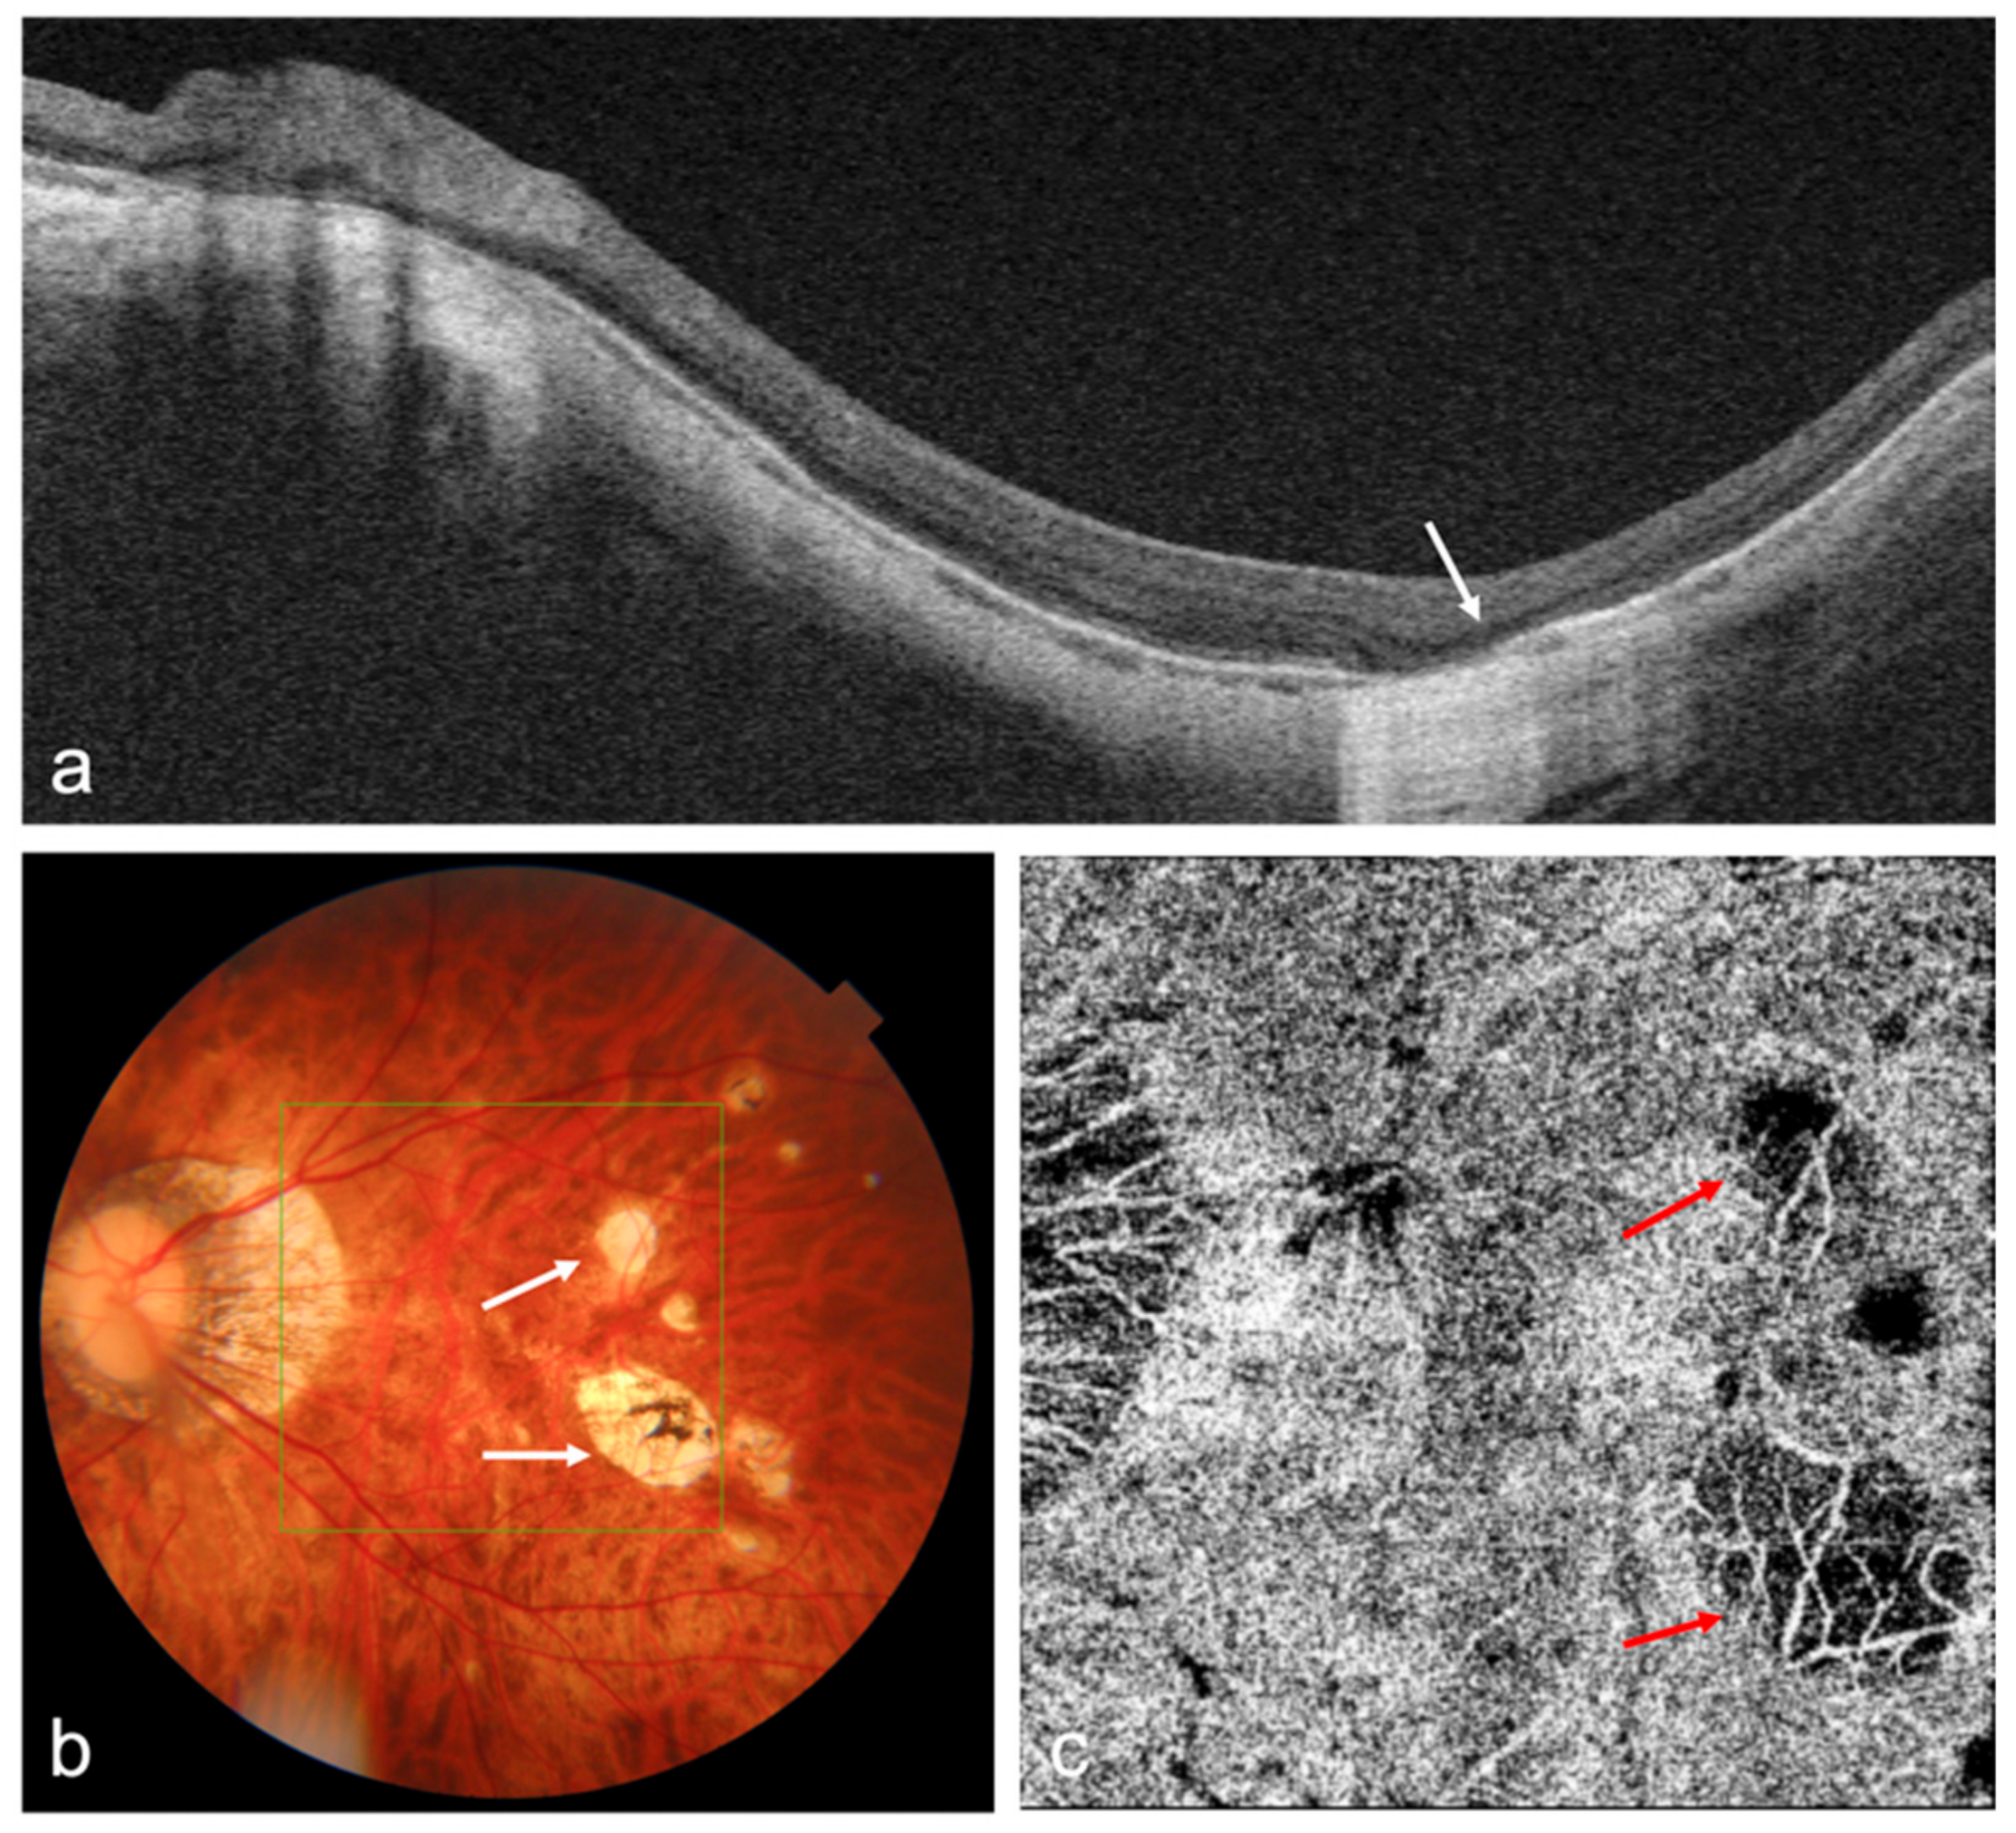 OCT and OCTA images of a highly myopic eye with patchy chorioretinal atrophy. (a) Swept-source OCT (SS-OCT) B-scan image shows the loss of retinal pigment epithelium (RPE), Bruch’s membrane, and choroid corresponding to the patchy atrophy area (white arrow); (b) Fundus photography shows patchy chorioretinal atrophy (white arrows); (c) OCTA image shows the loss of choriocapillaris flow signals corresponding to the patchy atrophy area (red arrows).